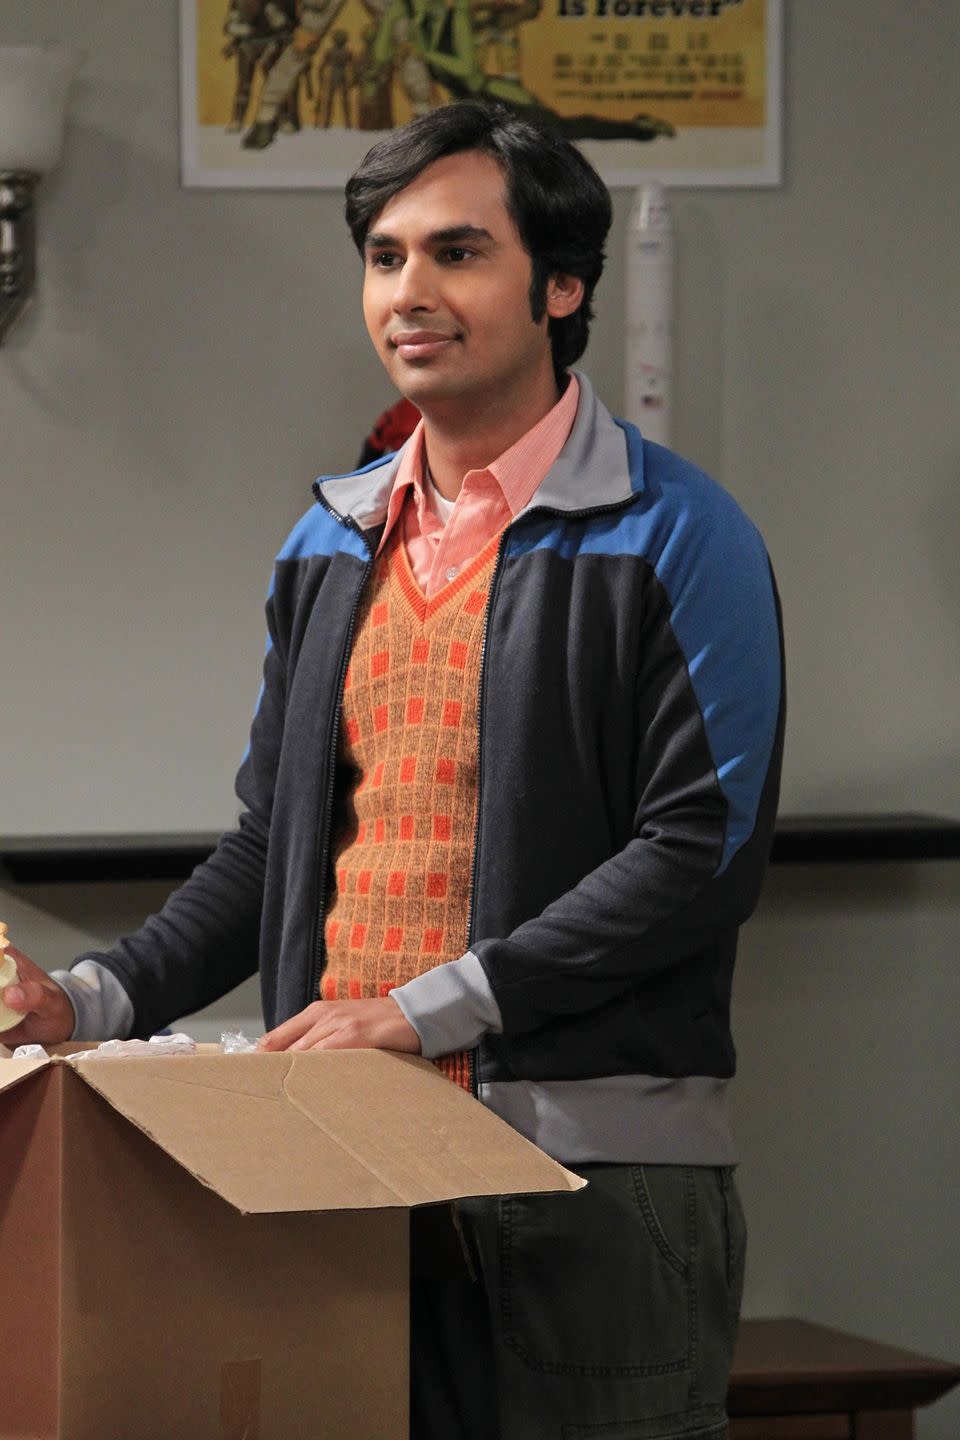 los angeles october 9 the habitation configuration wolowitz struggles with moving out of his mothers house, on the big bang theory, thursday, nov 8 800 831 pm, etpt on the cbs television network pictured kunal nayyar photo by sonja flemmingcbs via getty images 